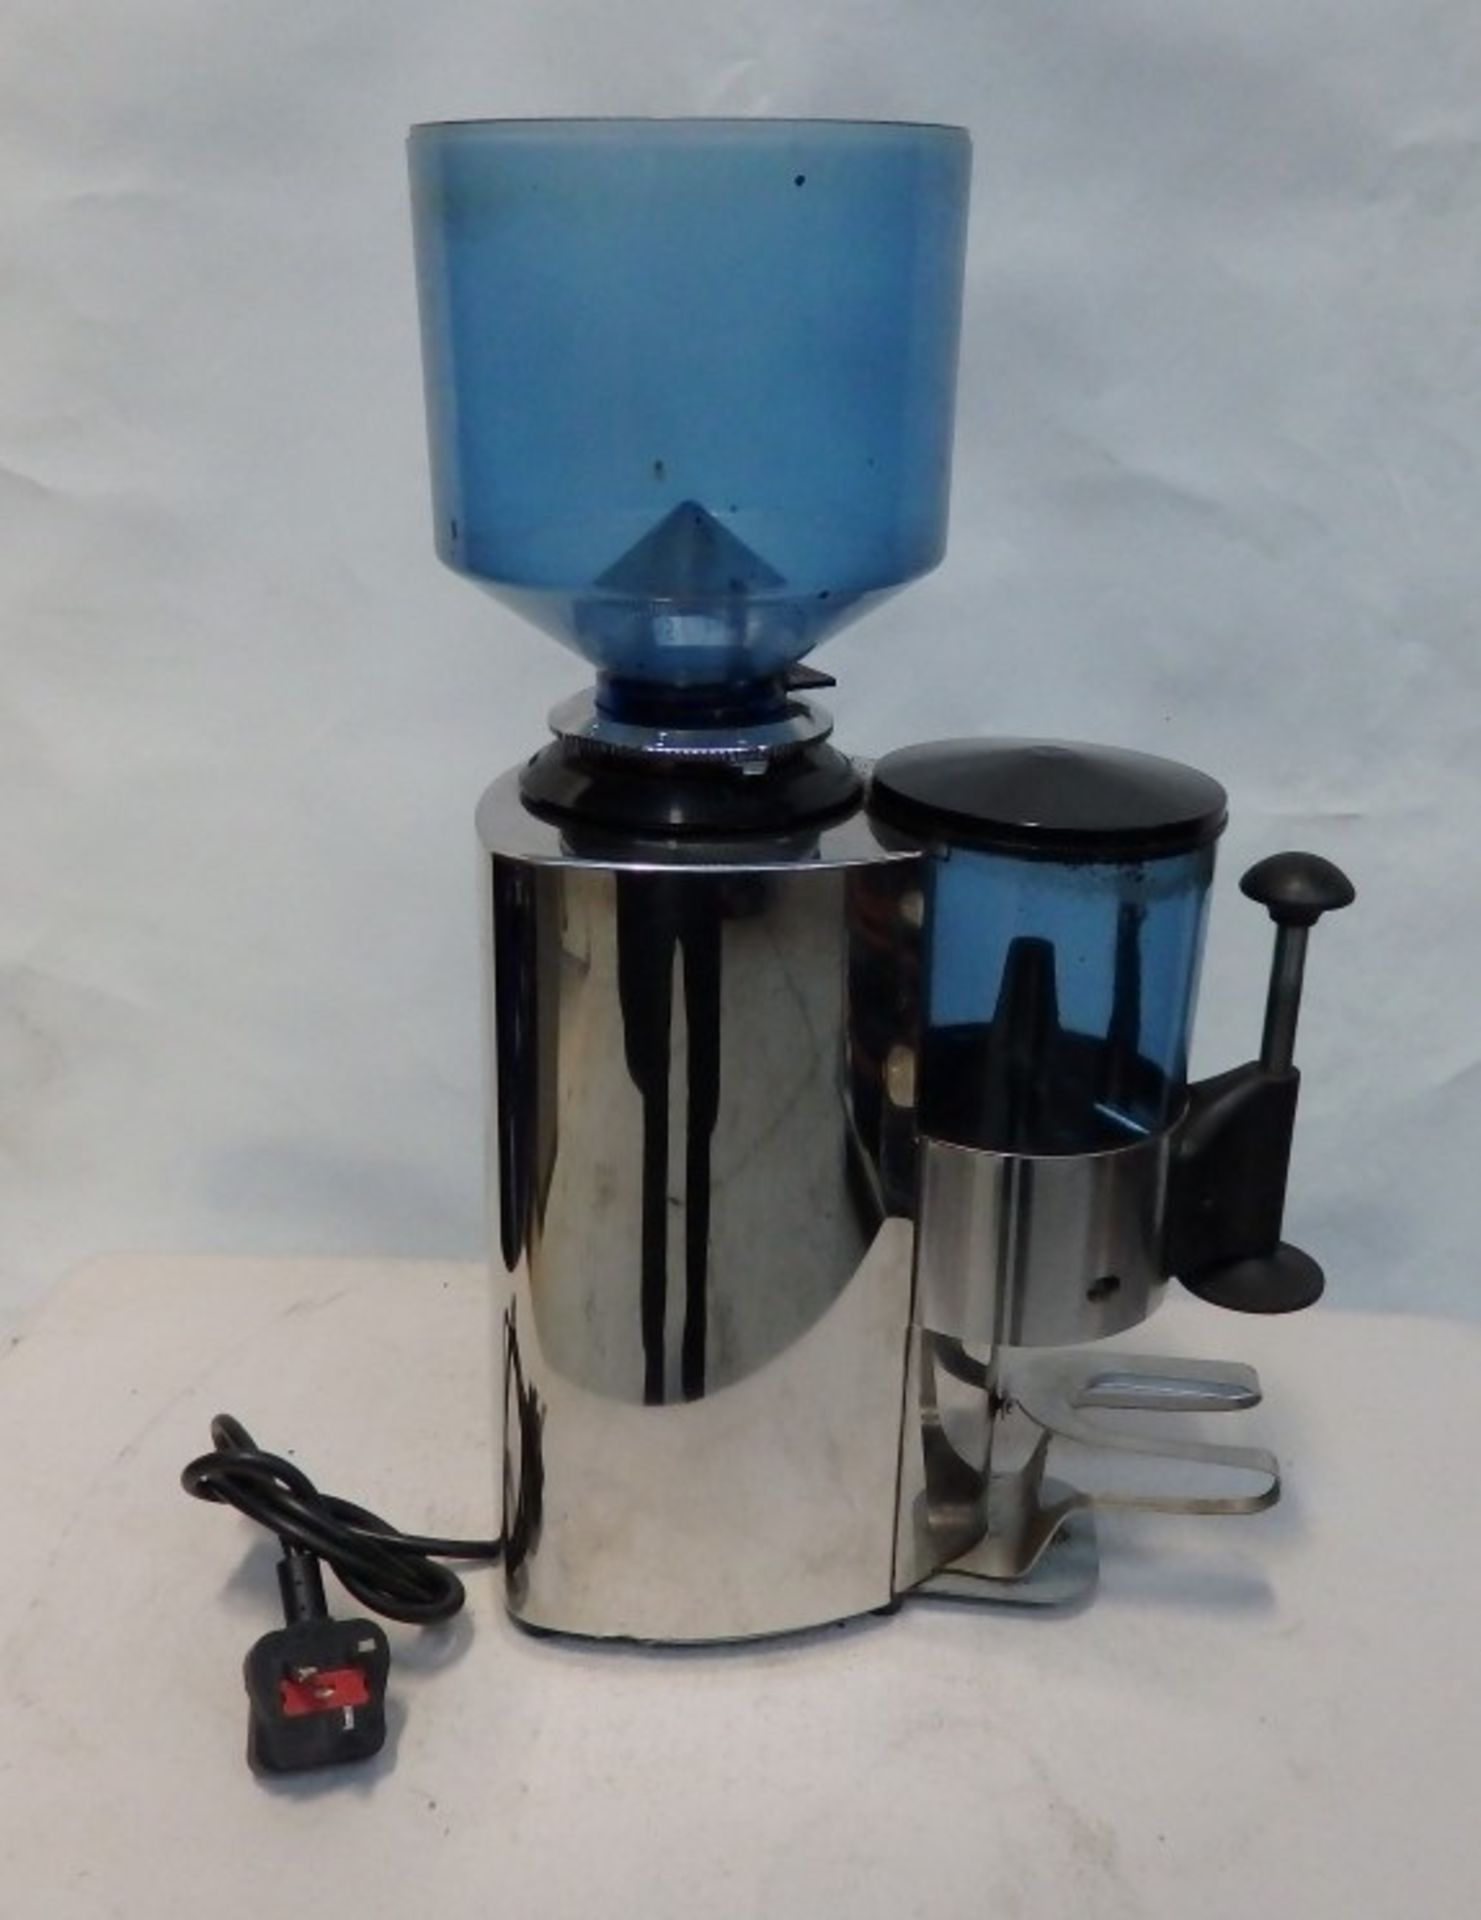 1 x Bezzera Commercial Coffee Grinder (Model BB003) - Stainless Steel AISI 304 Body - Capacity: